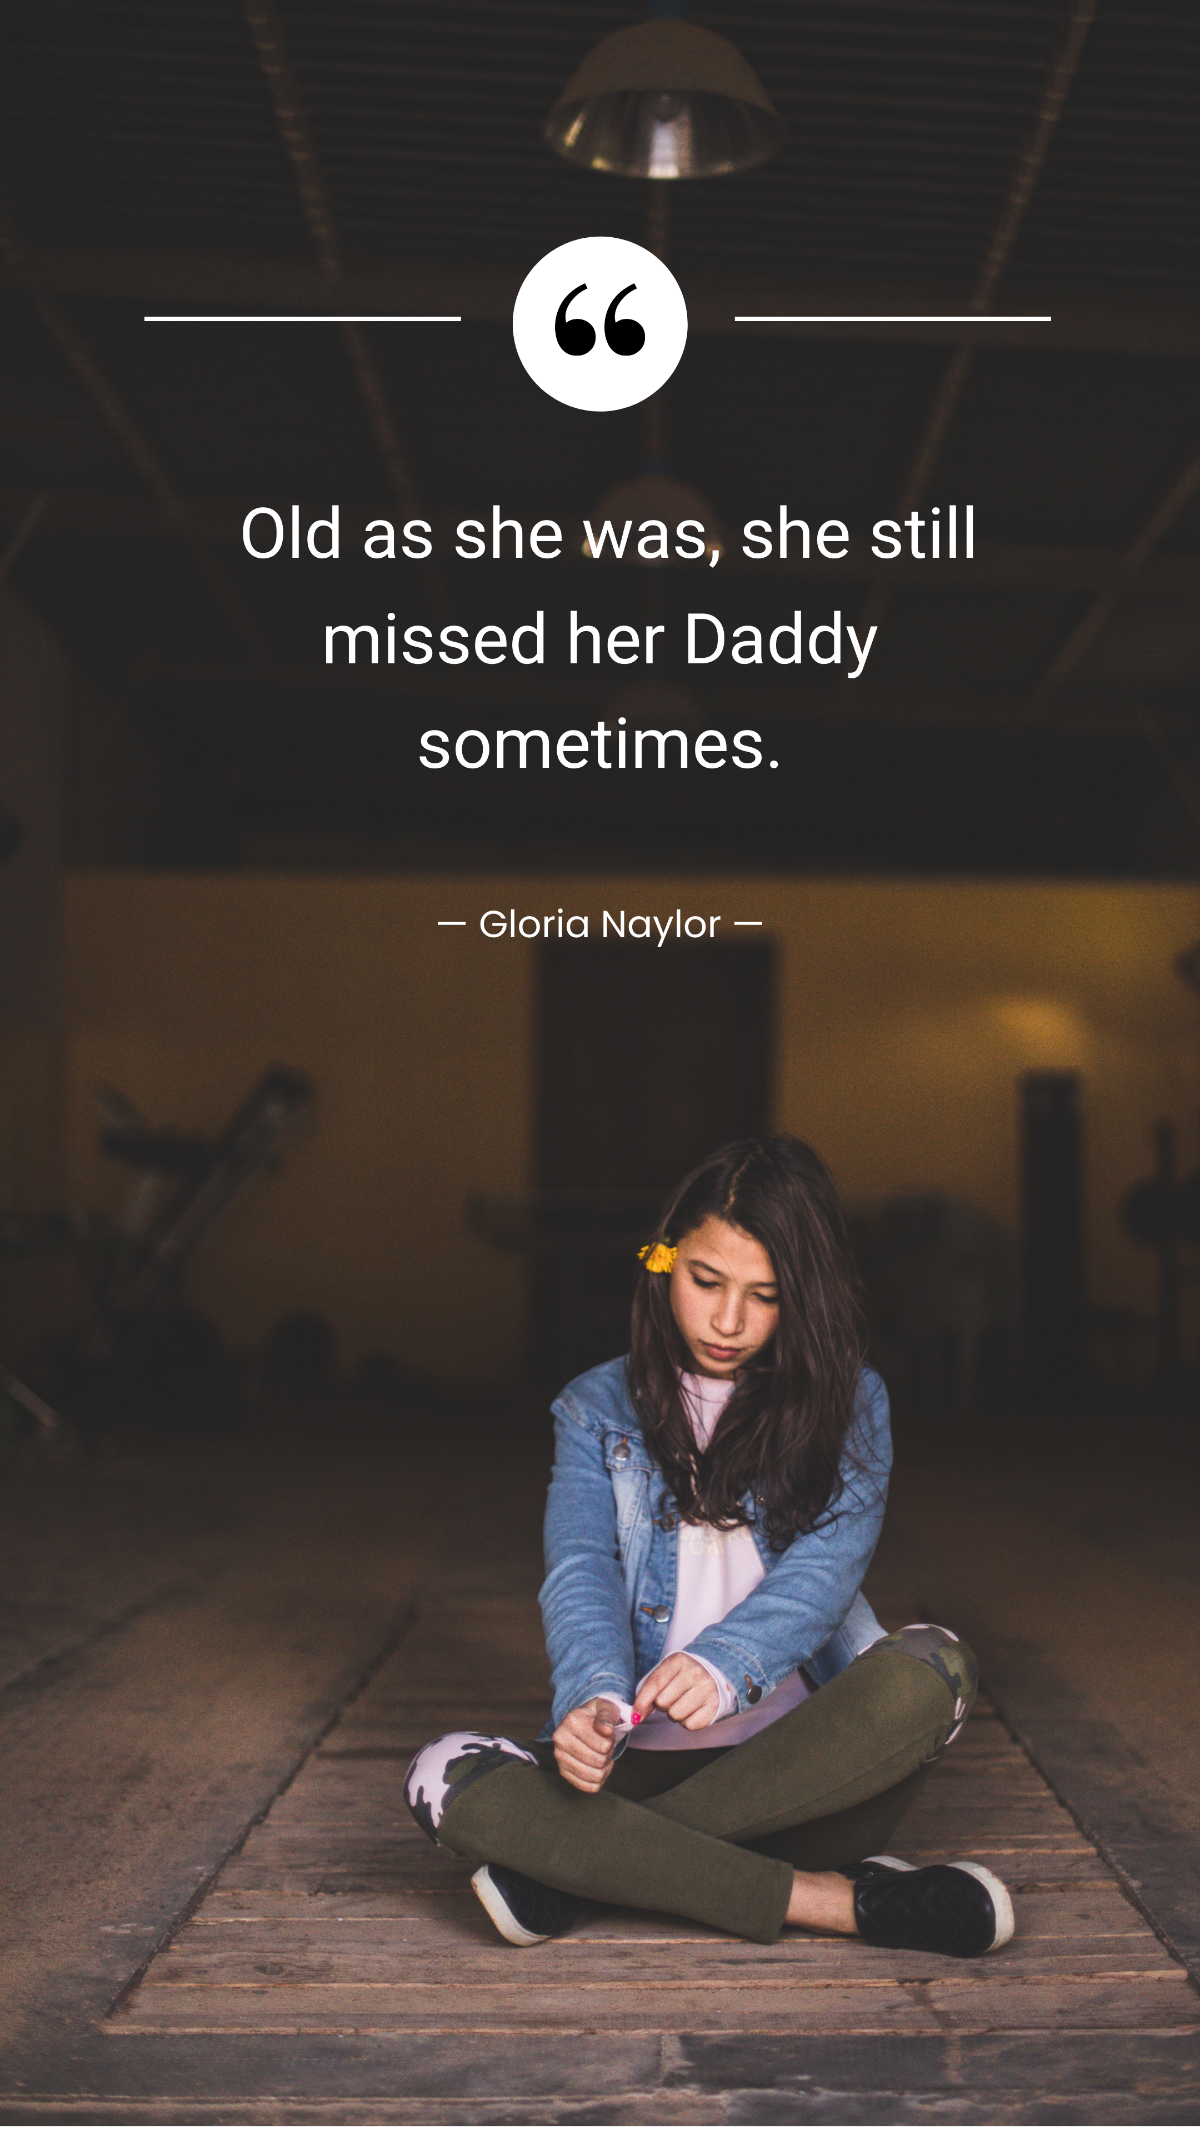 Gloria Naylor - Old as she was, she still missed her Daddy sometimes. Template